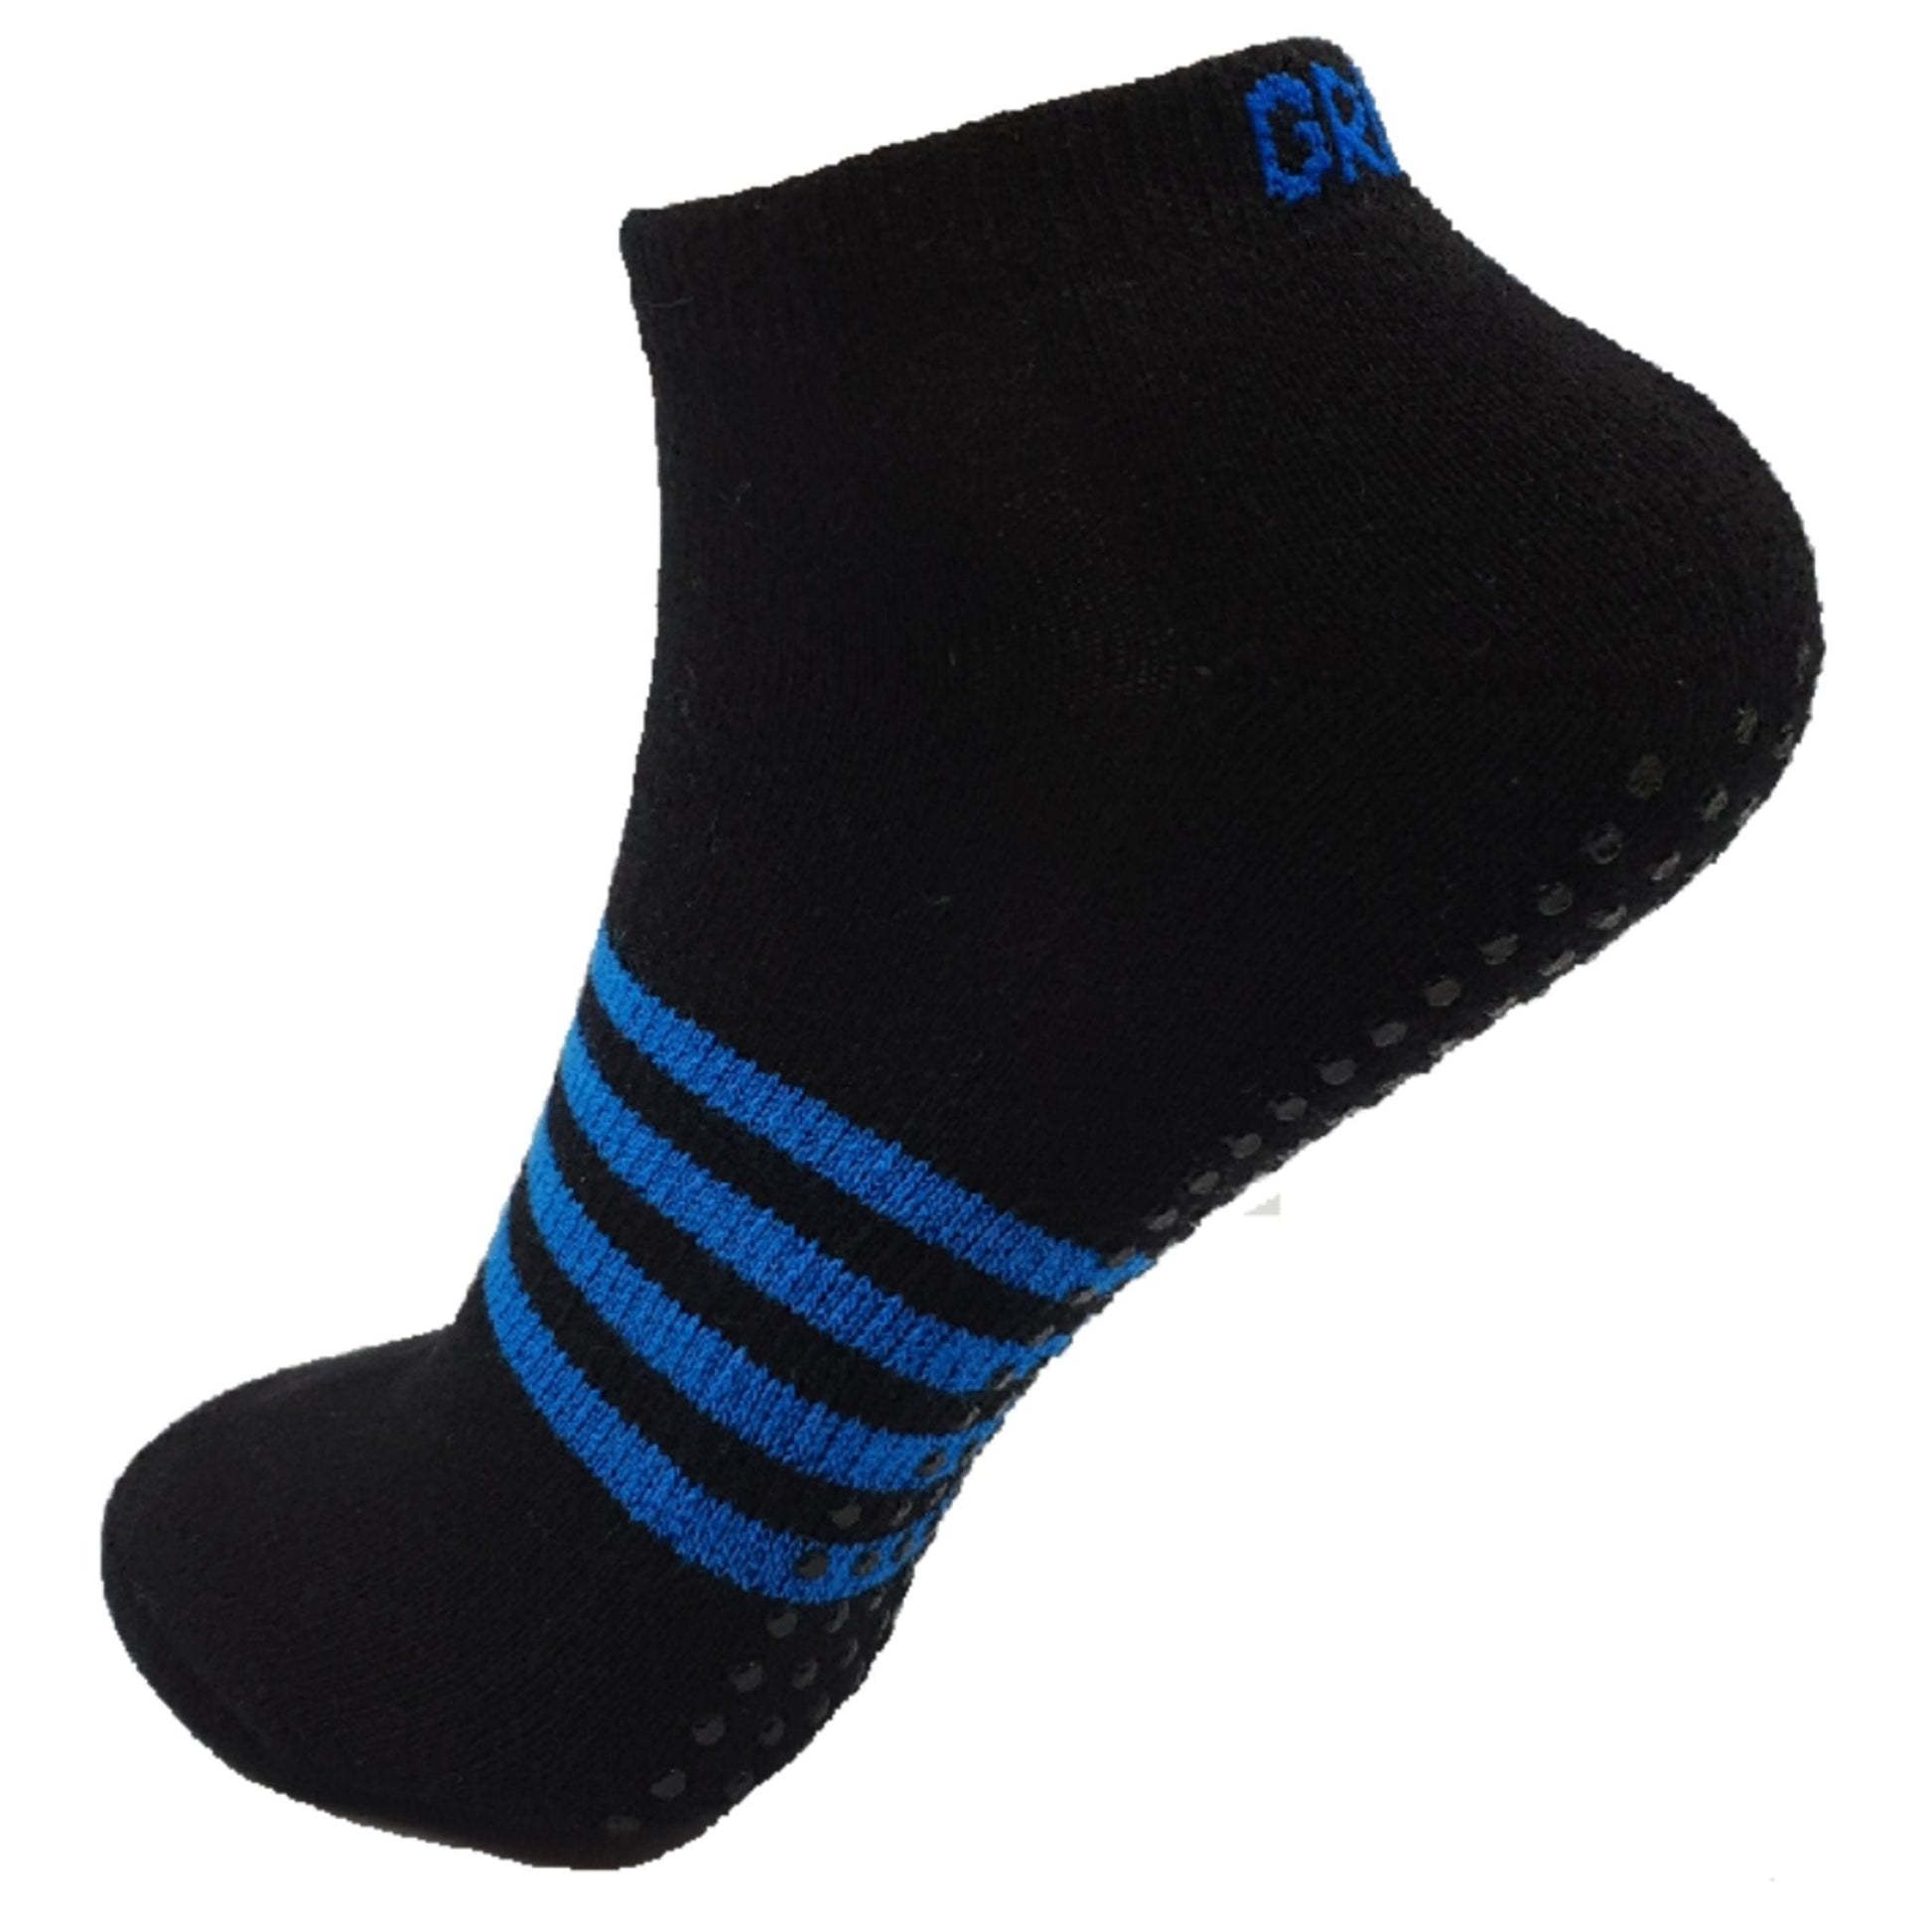 Gripperz Adult Grip Socks - Non Slip Active Ankle Socks - Caring Clothing